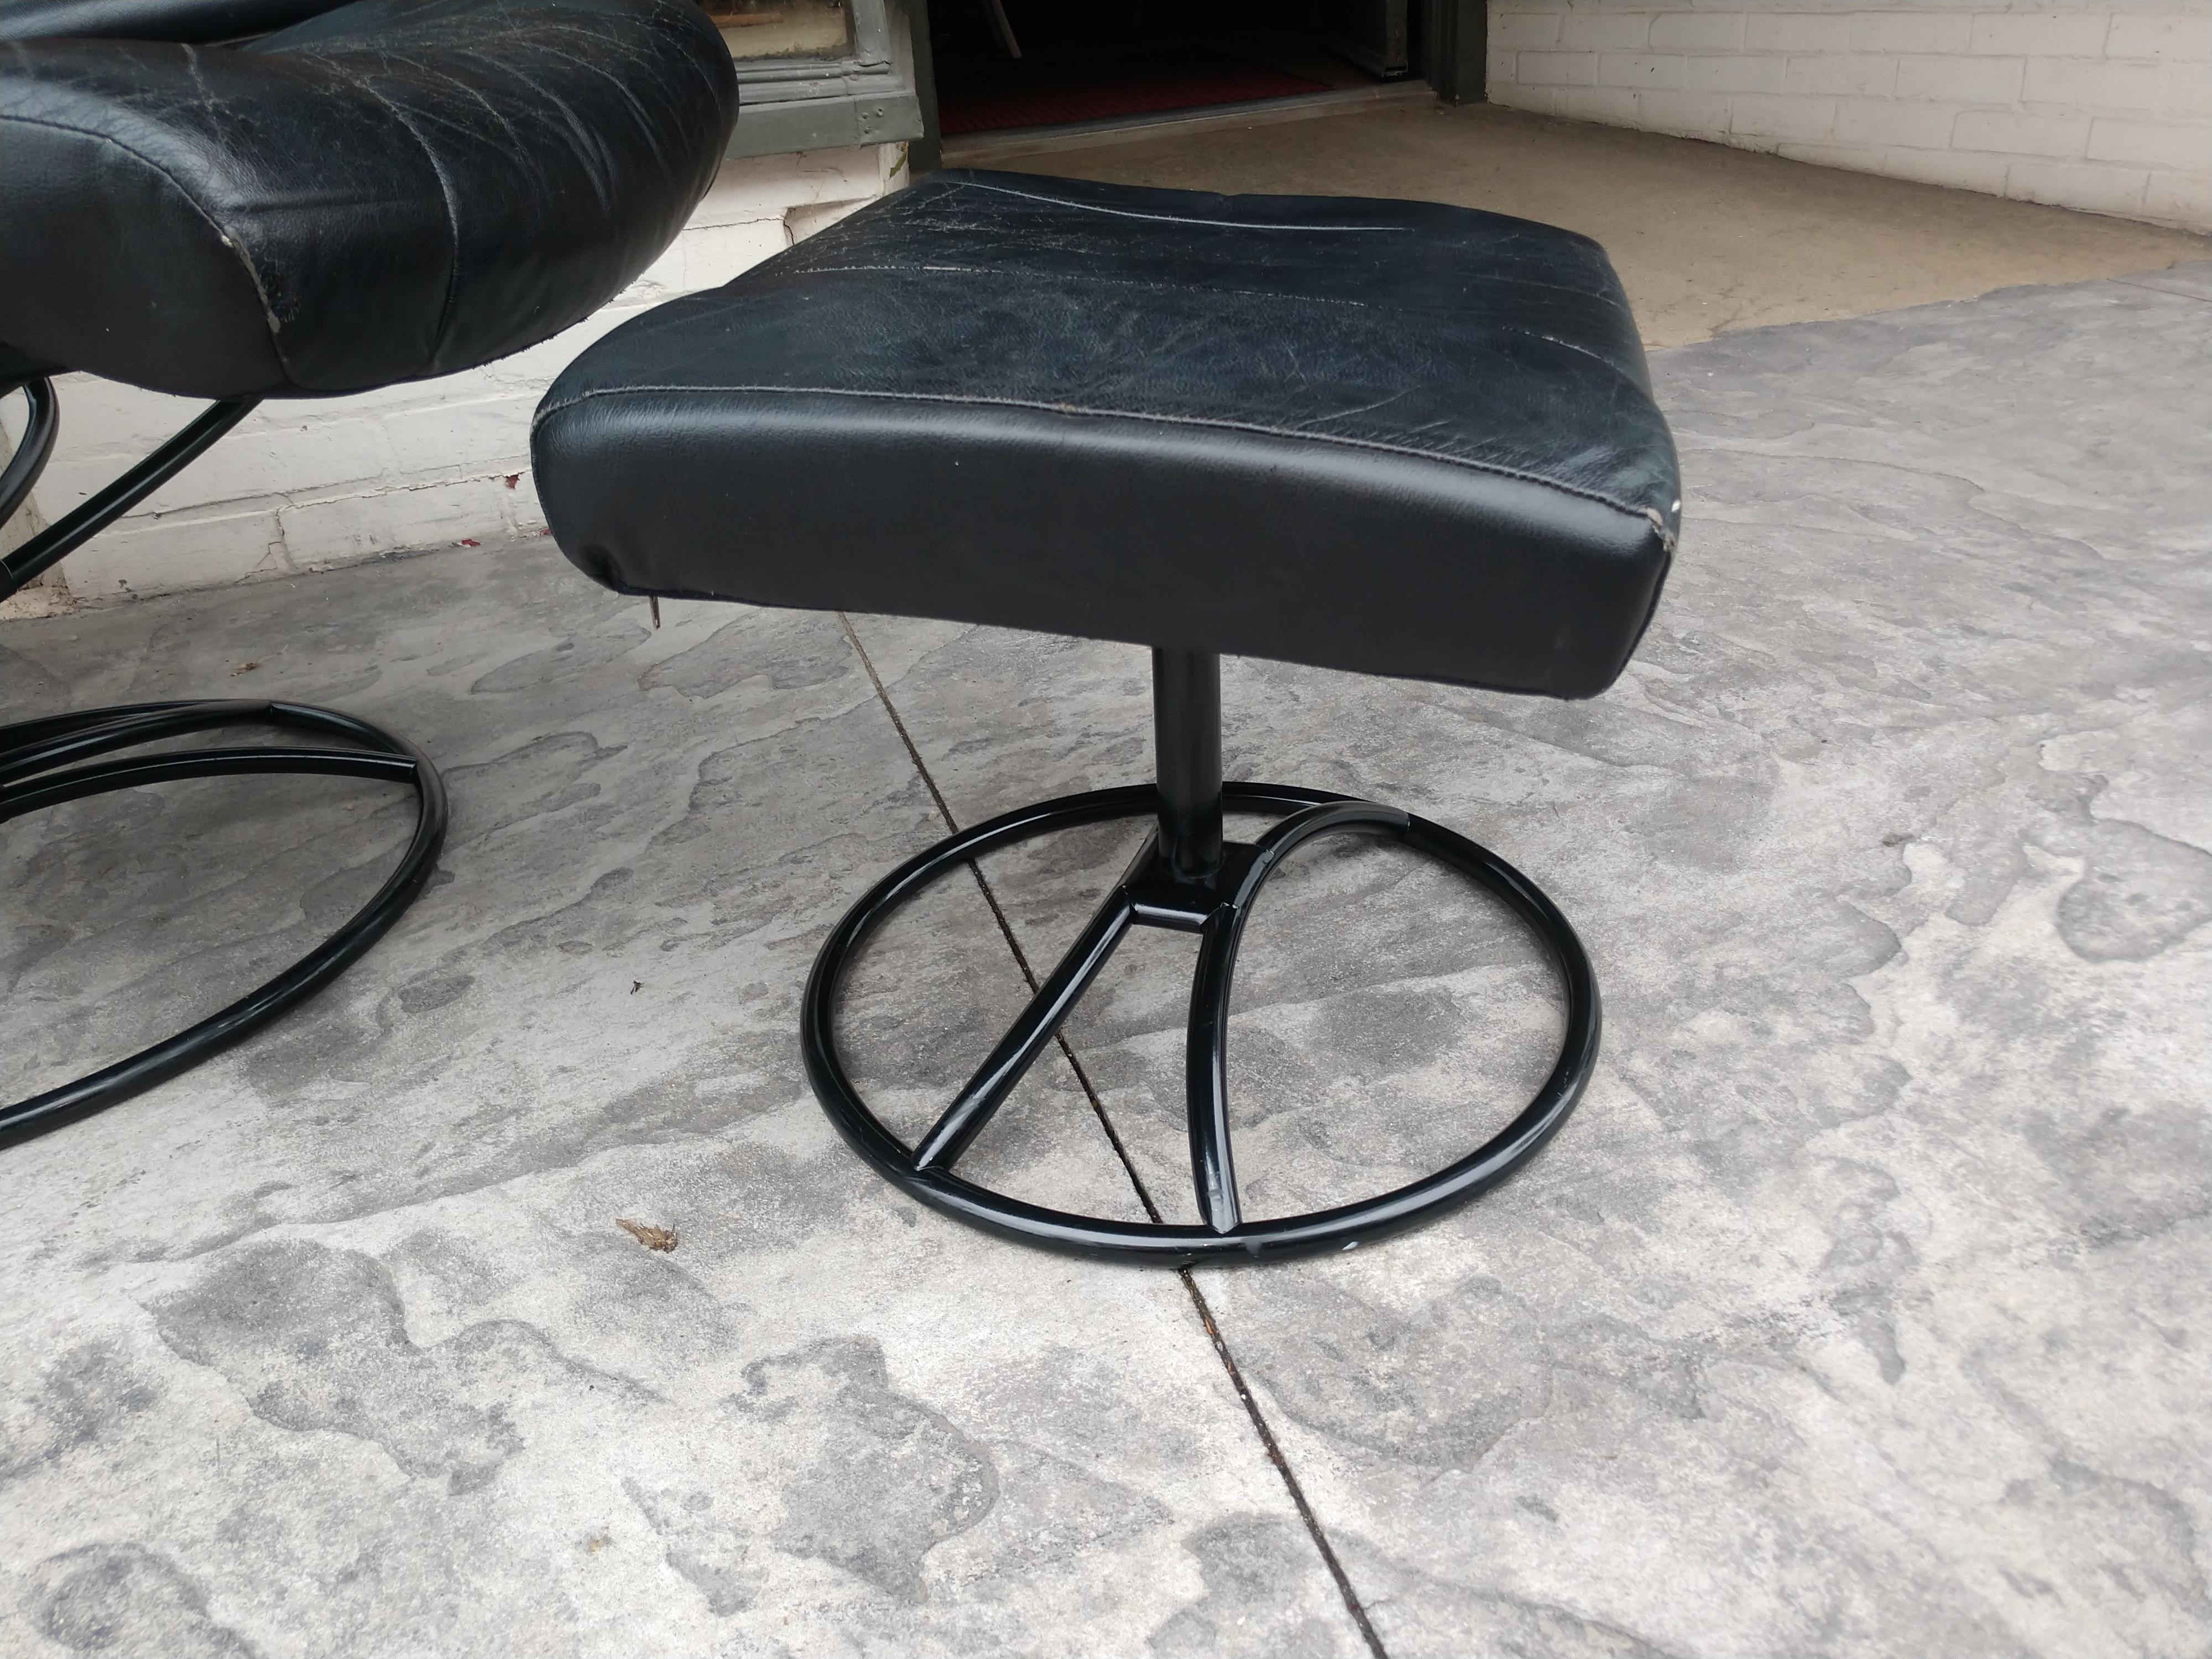 Vintage Ekornes stressless black leather fully adjustable lounge chair with swivelling black leather ottoman. Some minor wear to the leather, no cracks or splits, tears or other damage. Works like a charm. The most comfortable chair to sit in. When